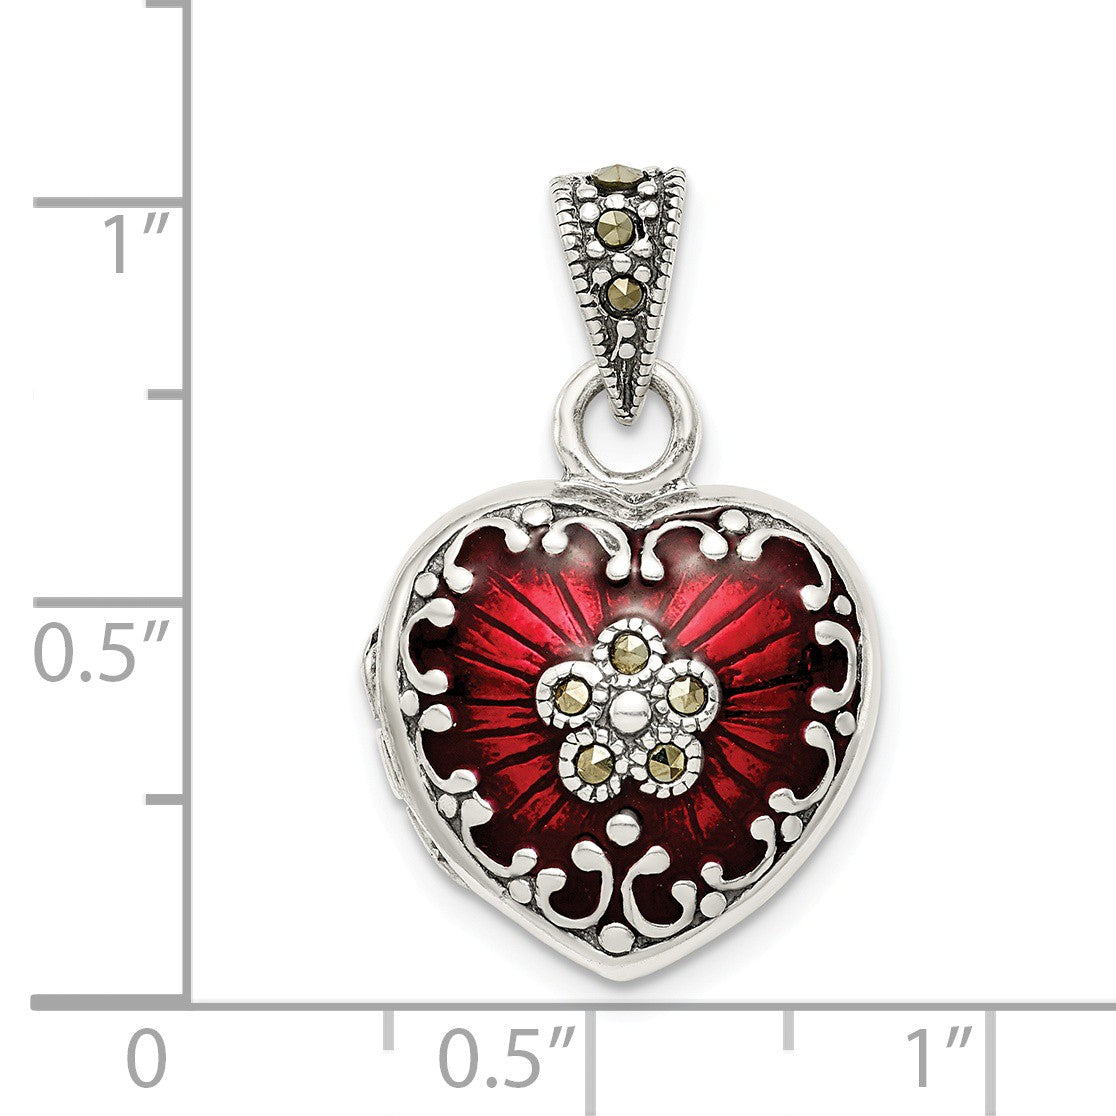 Alternate view of the Sterling Silver, Red Enamel and Marcasite Antiqued Heart Locket, 16mm by The Black Bow Jewelry Co.